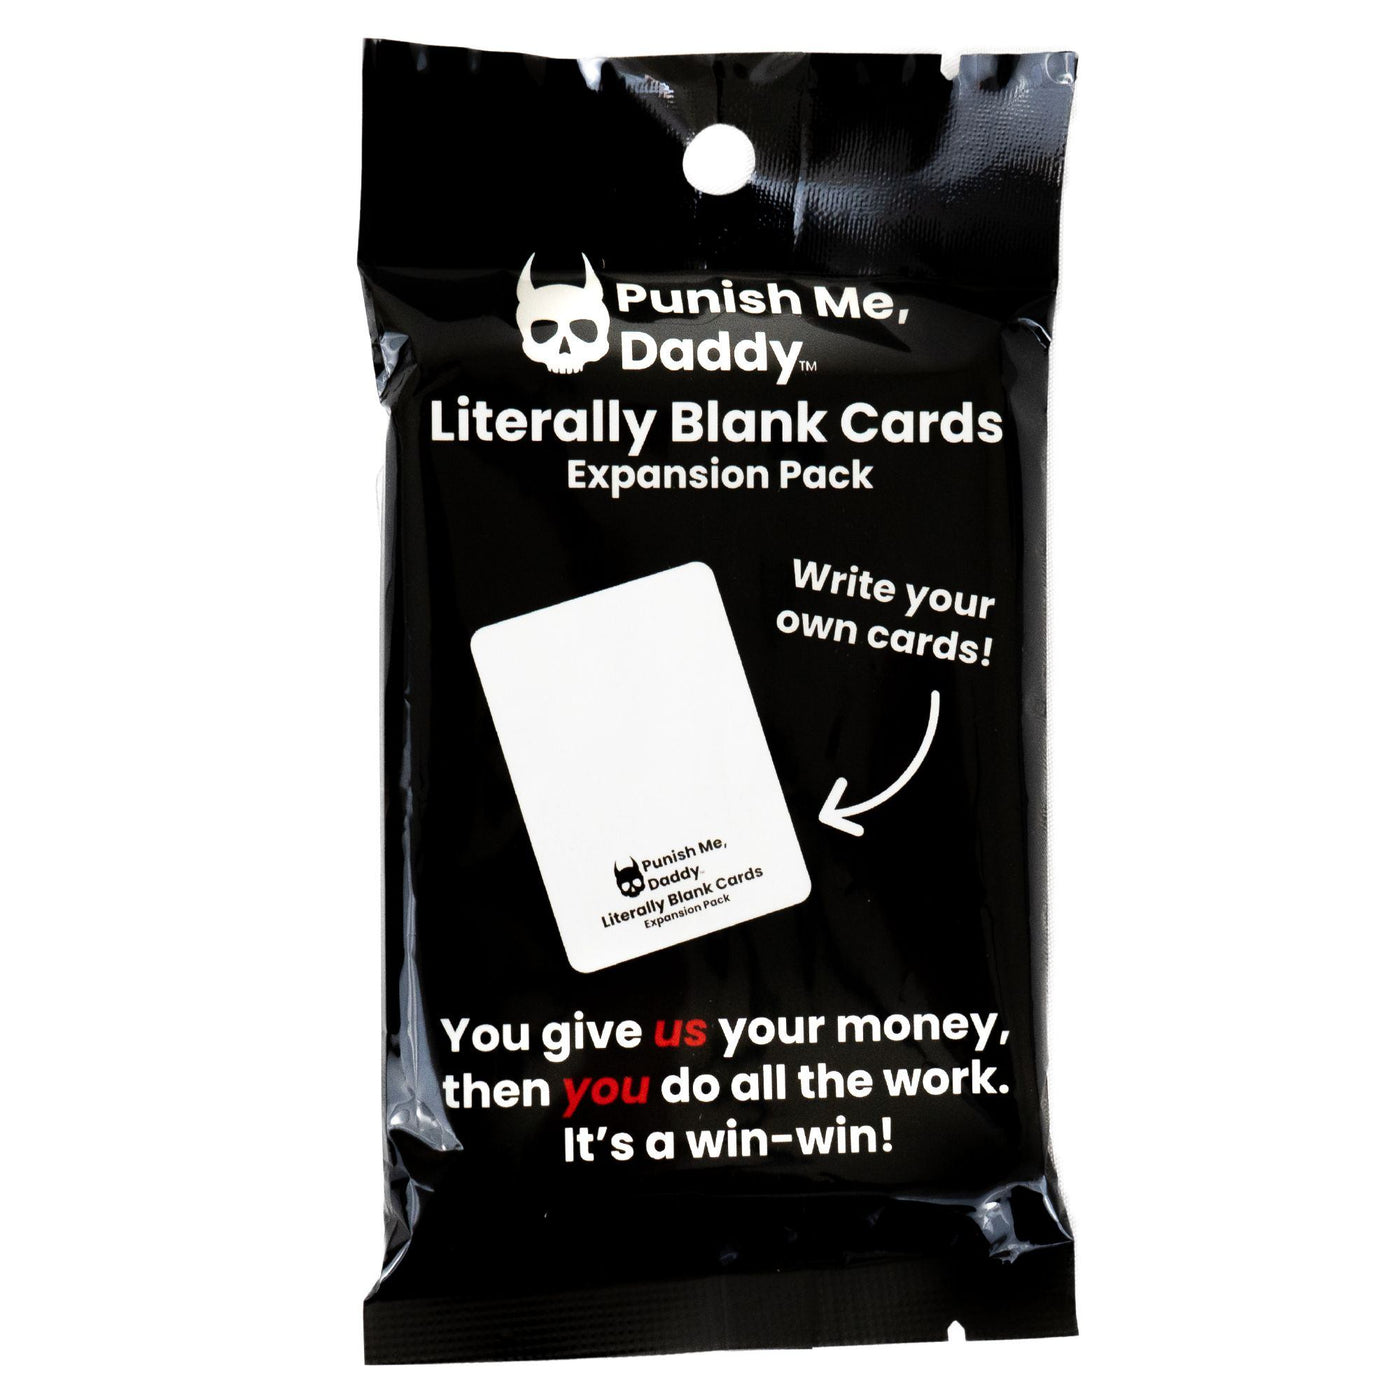 Punish Me, Daddy: Literally Blank Cards Expansion Pack